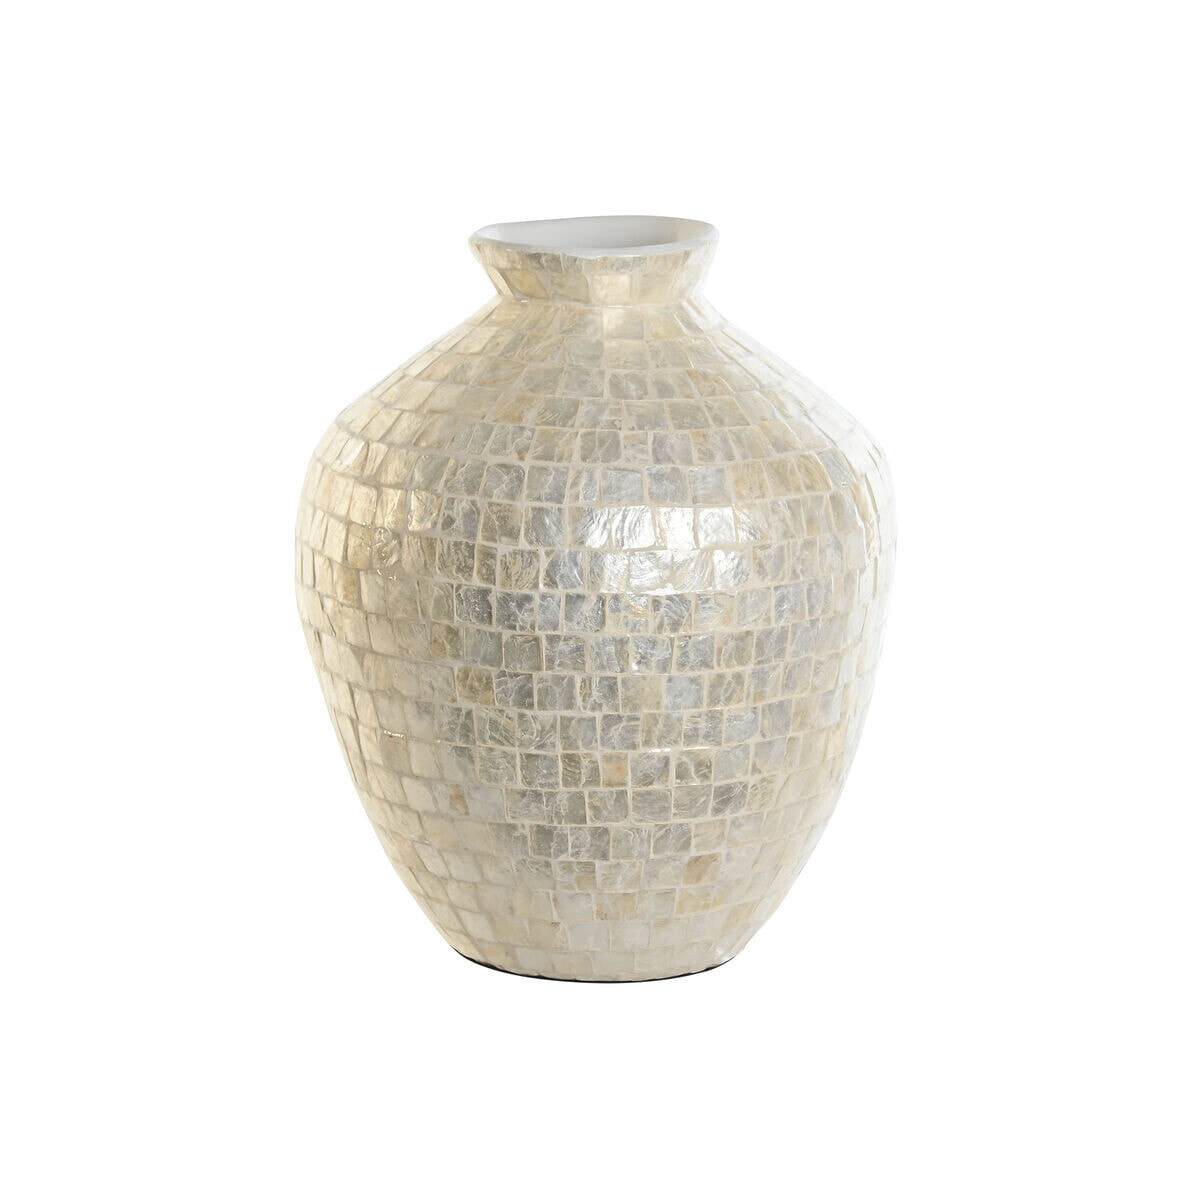 Vase DKD Home Decor White Bamboo Mother of pearl Natural Leaf of a plant Mediterranean 30 x 30 x 36 cm